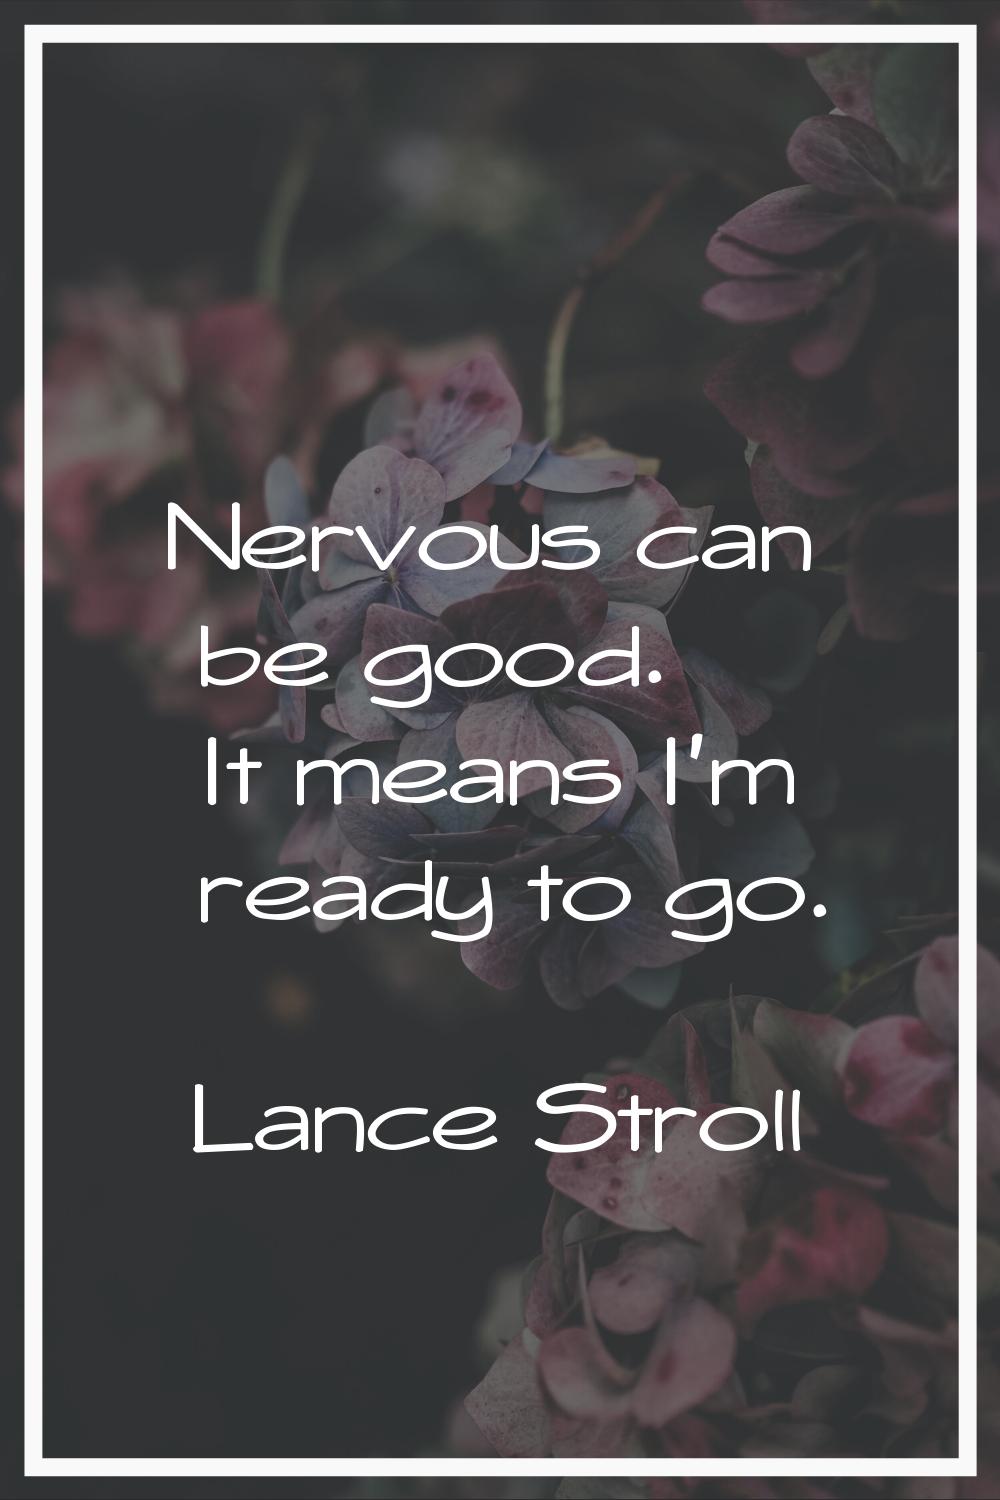 Nervous can be good. It means I'm ready to go.